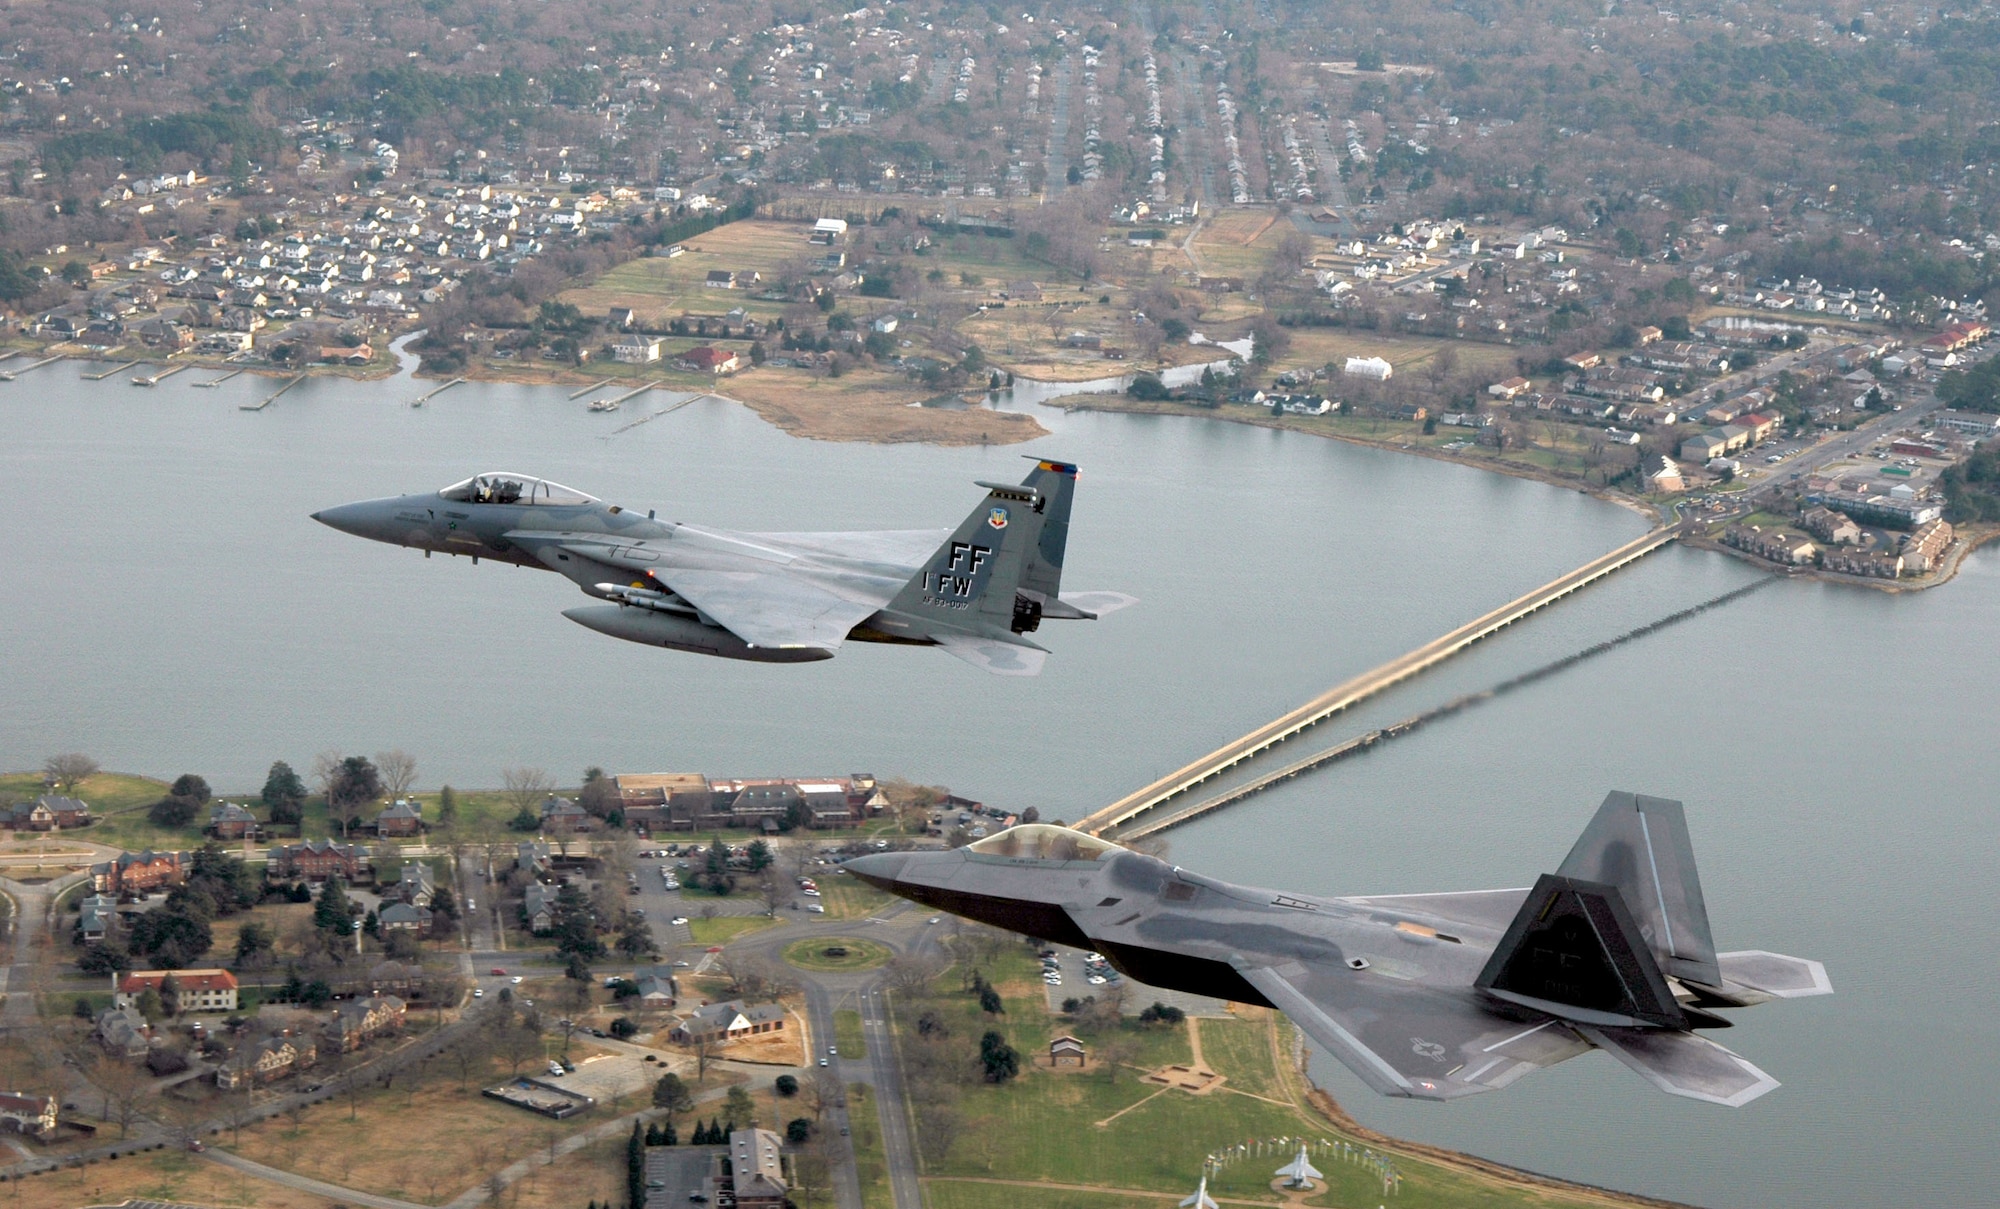 LANGLEY AIR FORCE BASE, Va. -- An F/A-22 Raptor (foreground) and an F-15 Eagle fly over Langley Air Force Base, Va., Jan. 7.  It was the Raptor's final flight before landing at its new home here.  The F/A-22 will be used as a training tool to keep 1st Fighter Wing maintainers proficient on the Raptor.  The wing's 27th Fighter Squadron pilots will begin flying operational missions later this month when the second Raptor arrives.  (Air Force photo by Senior Master Sgt. Keith Reed)